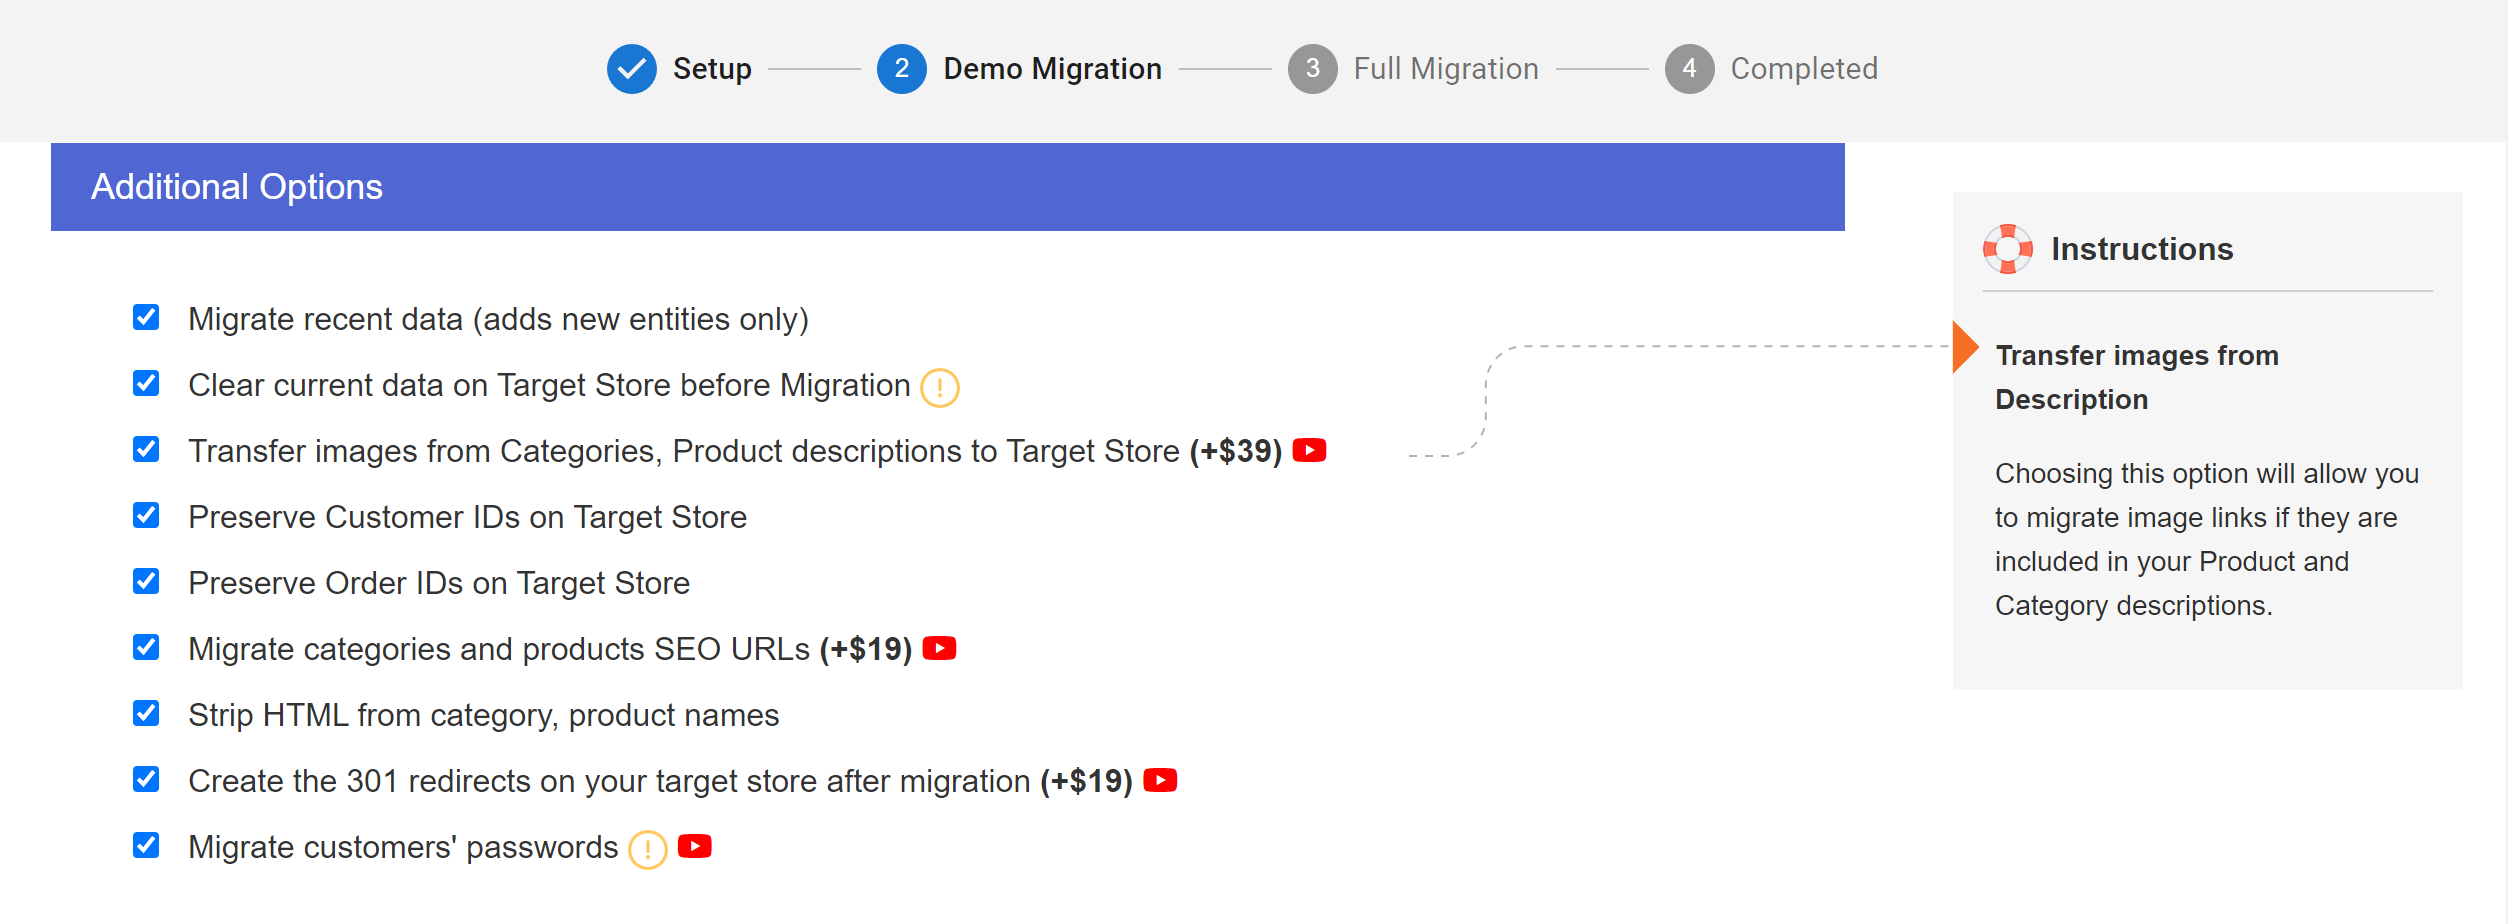 Additional Options for migration